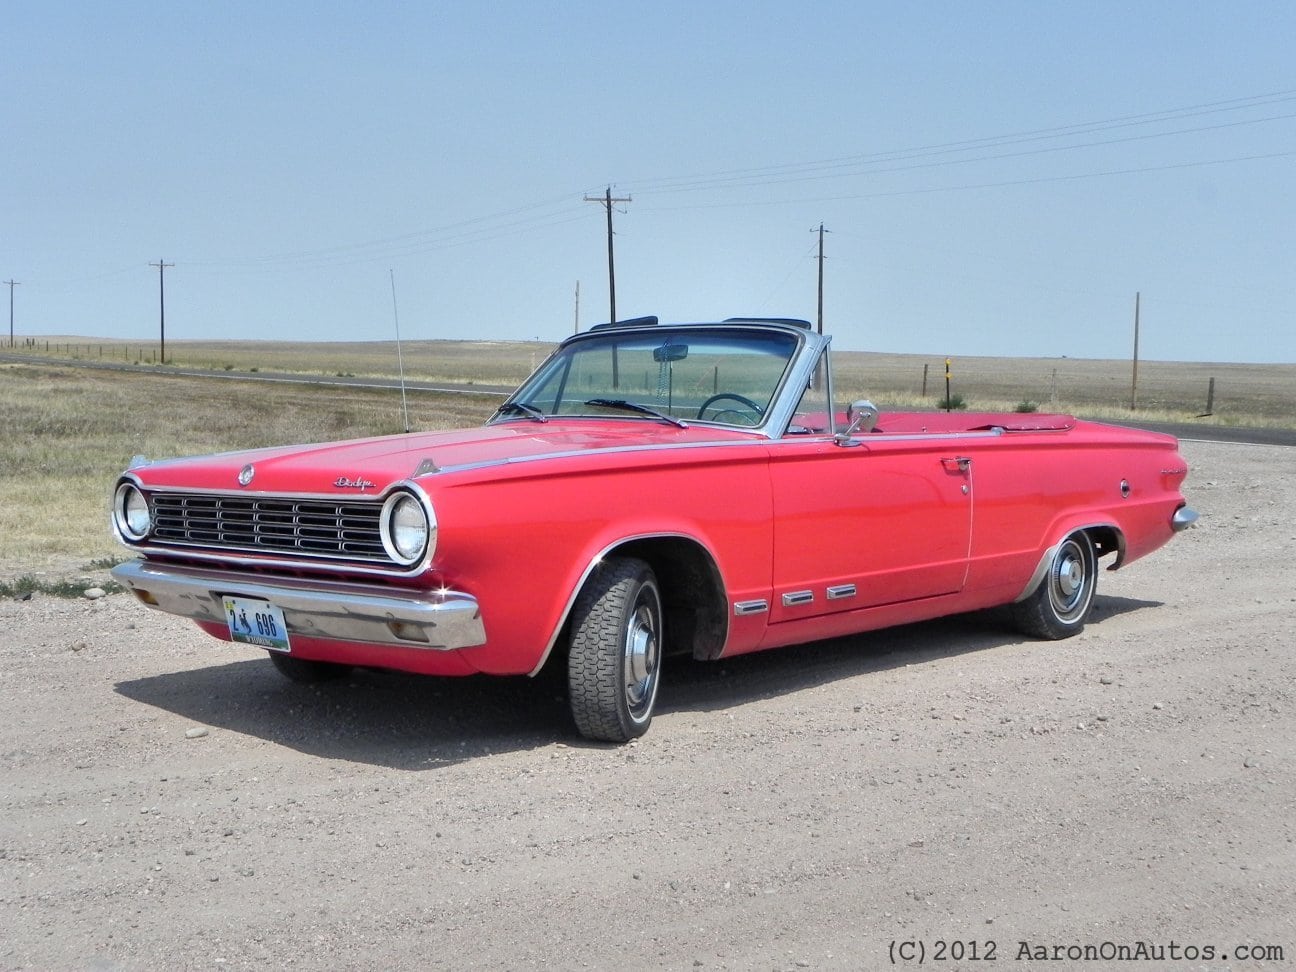 1965 Dodge Dart – An Ahead Of Its Time Fuel Sipper